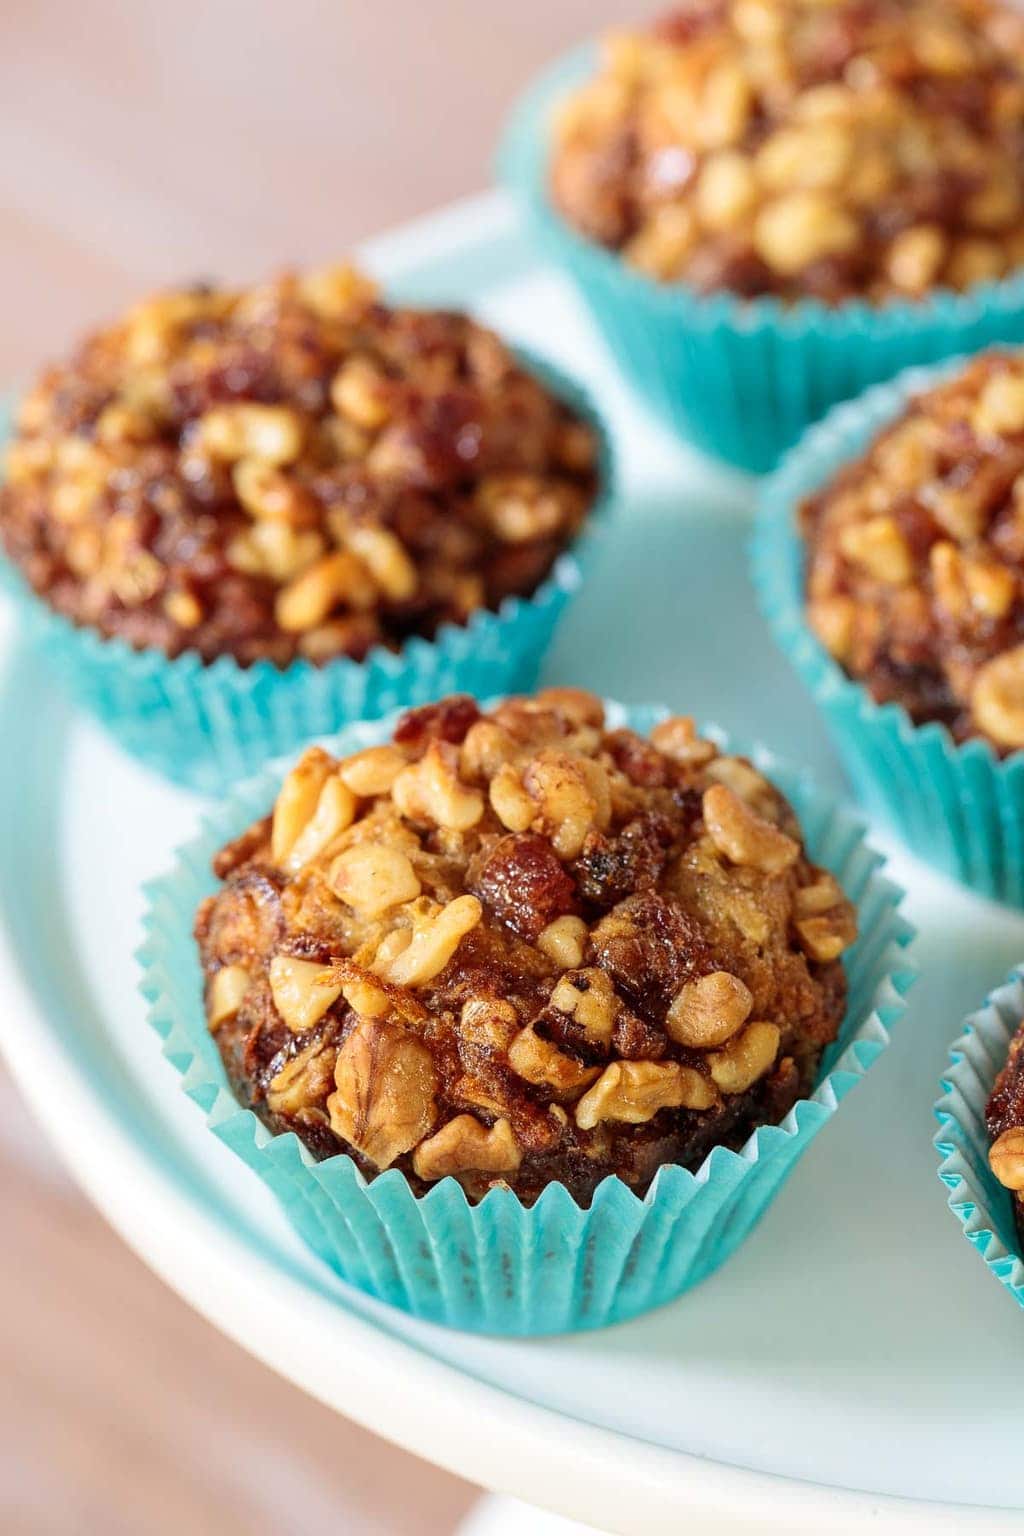 Vertical closeup photo of Walnut Date Banana Muffins in turquoise wrappers on a white cake stand